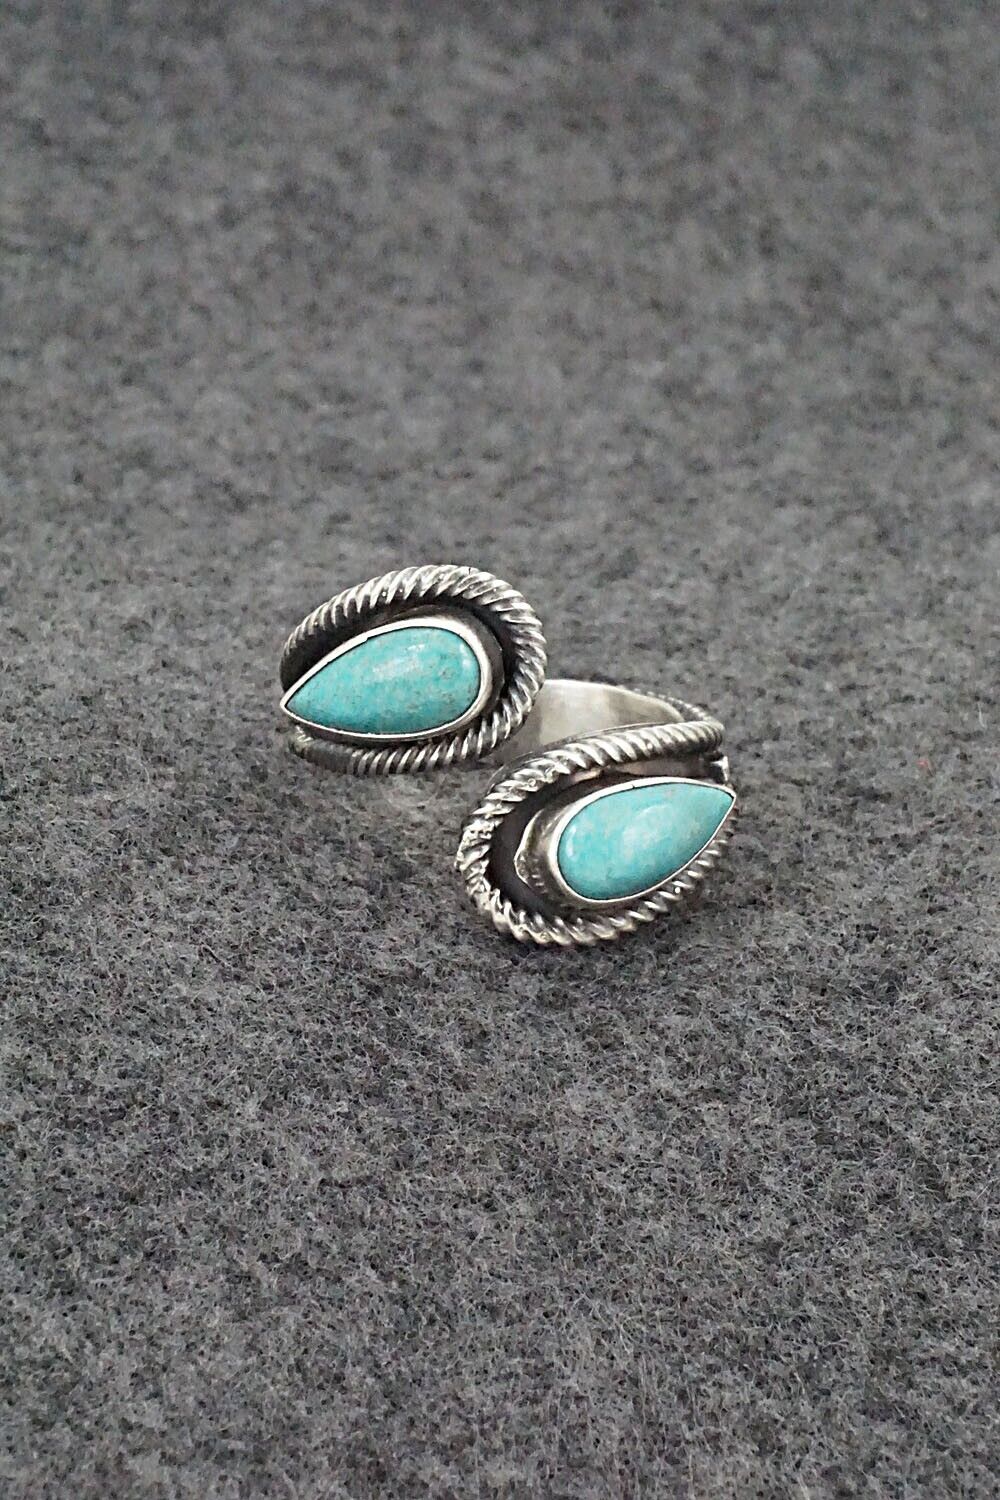 Turquoise & Sterling Silver Ring - Kenny Lonjose - Size 8.5